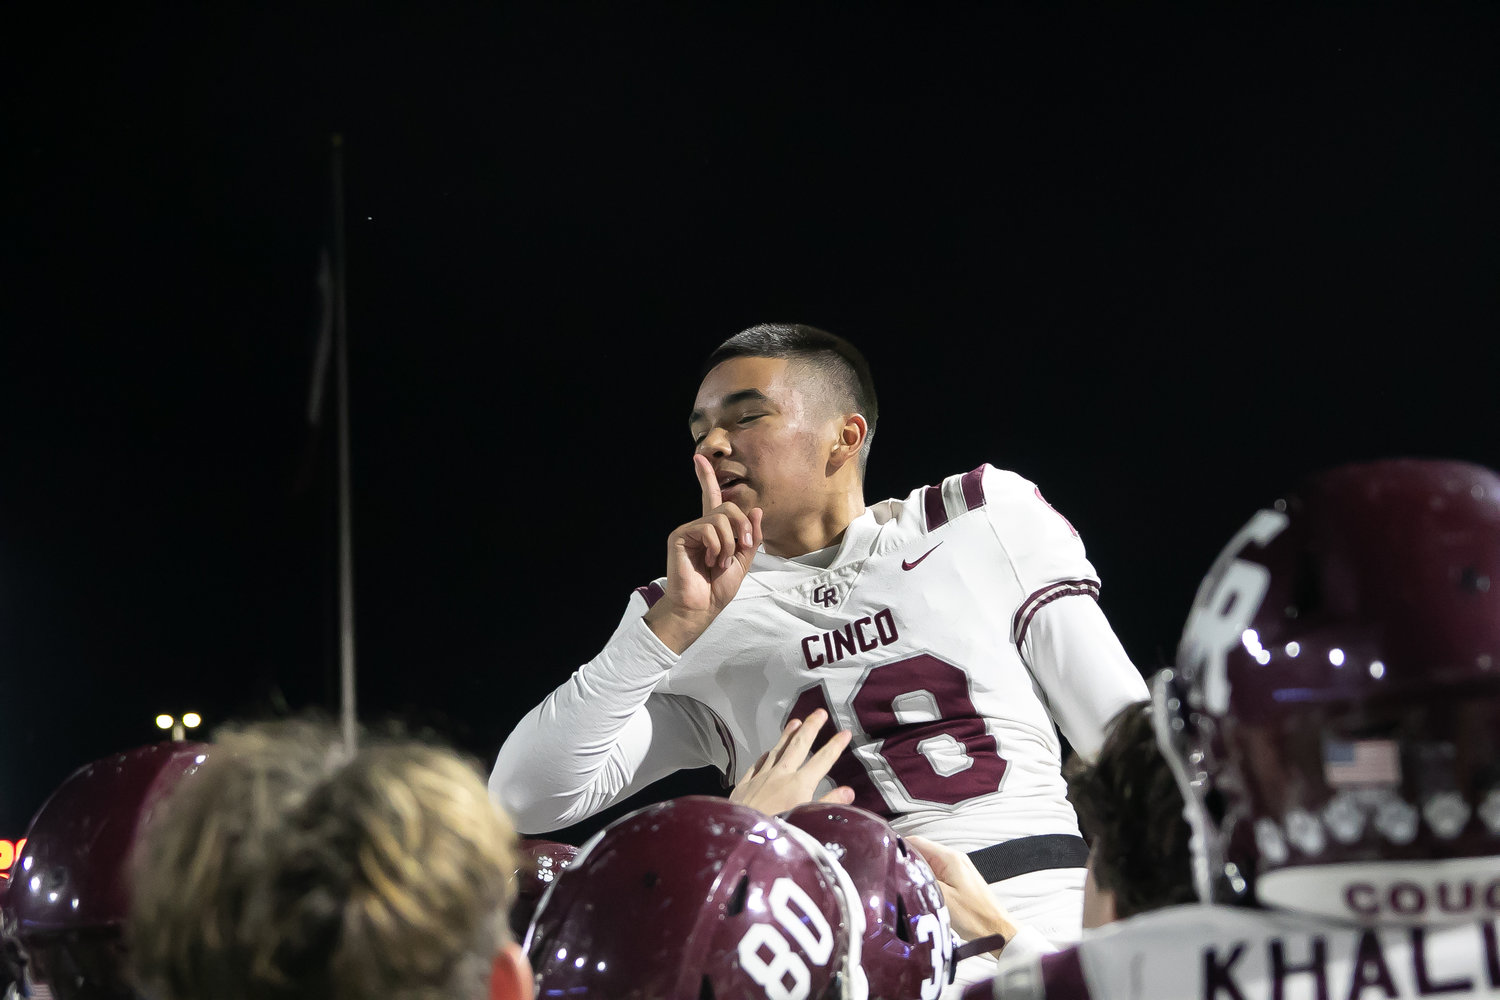 Santiago Taborda celebreates after kicking a game winning field goal during Friday's Class 6A-Division I area round game between Cinco Ranch and Cy-Fair at Pridgeon Stadium.